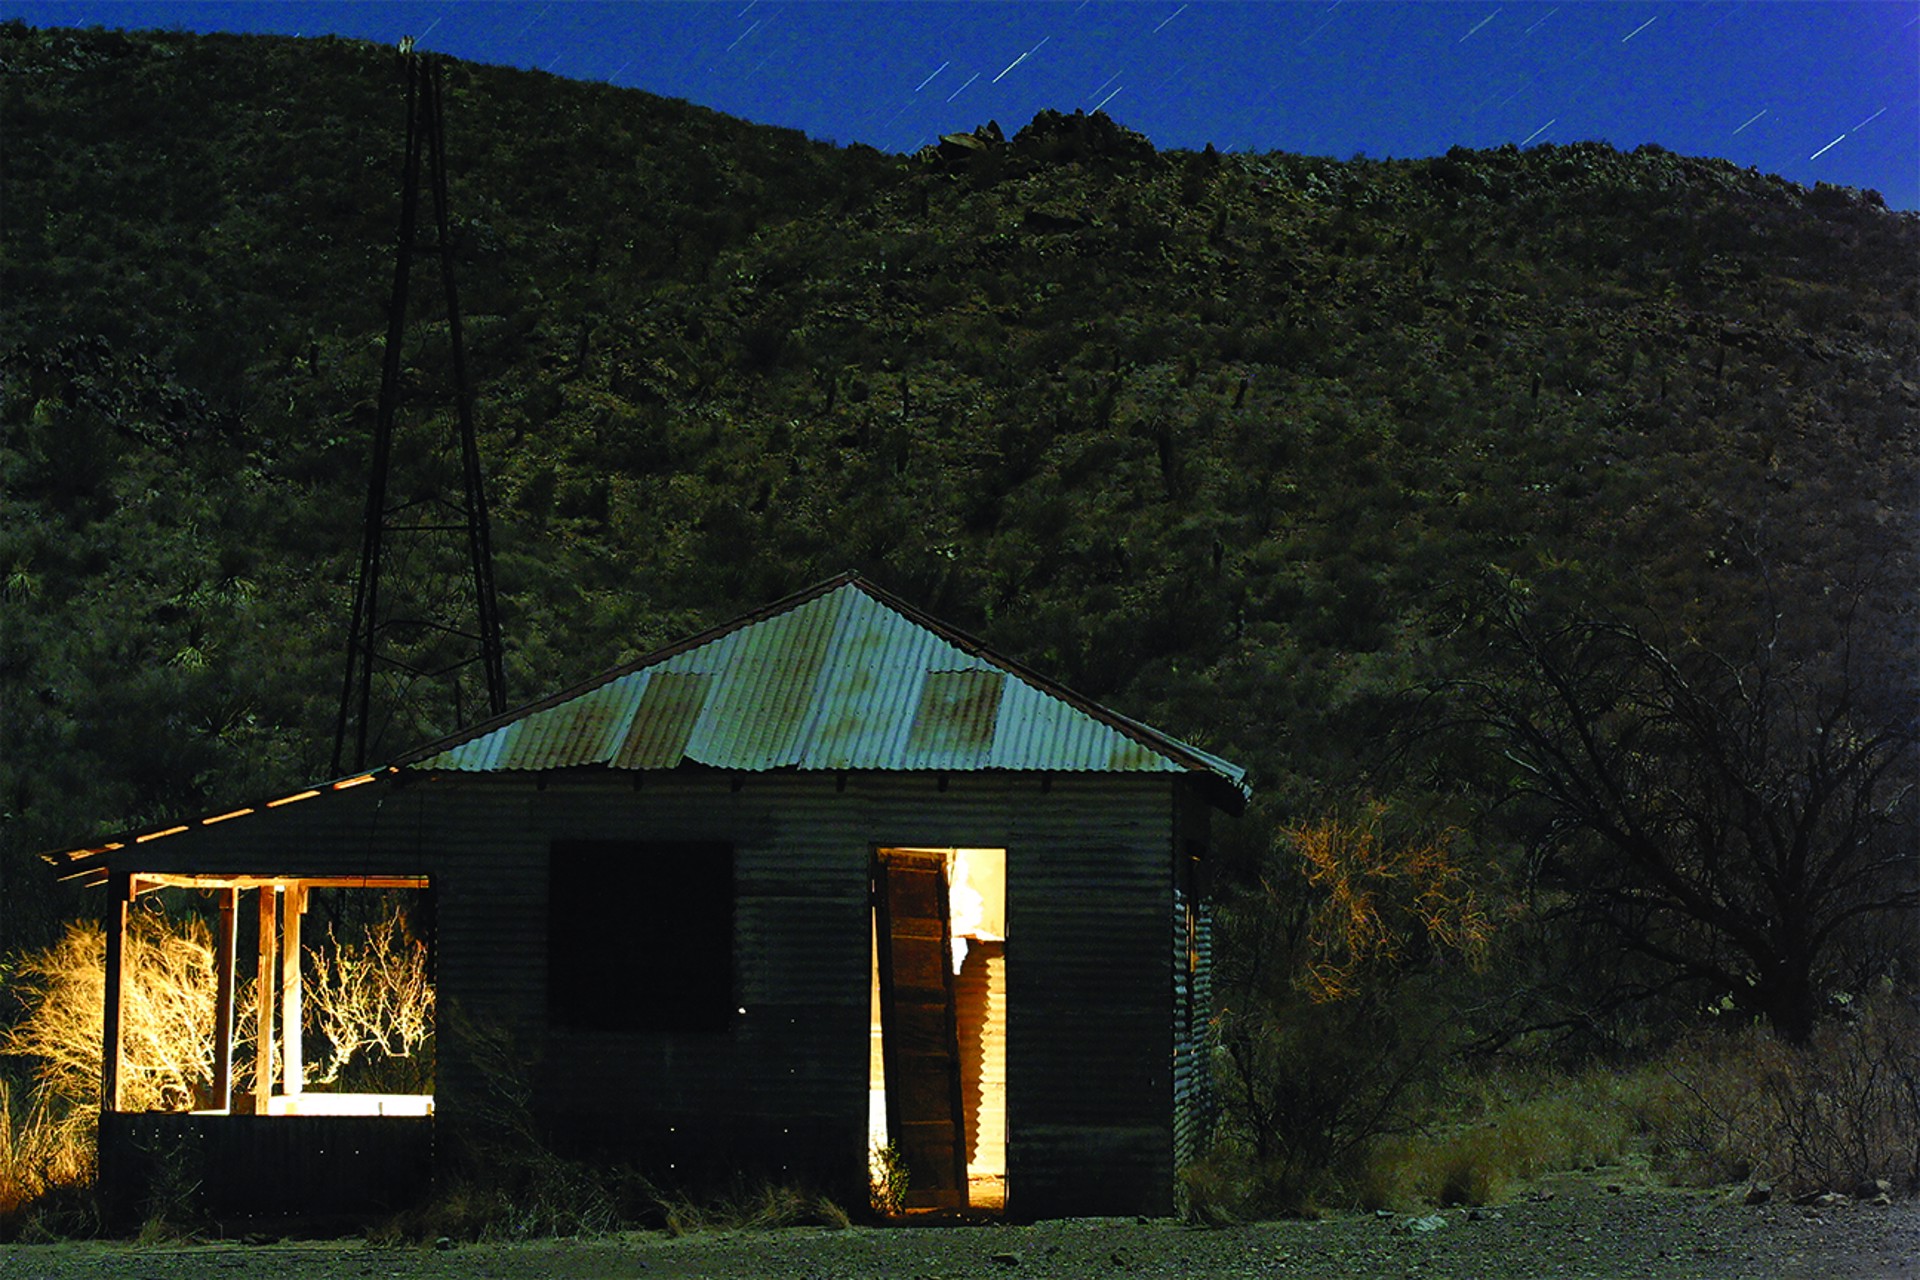 Tumbledown Shack in Brewster County  by Charles Clark